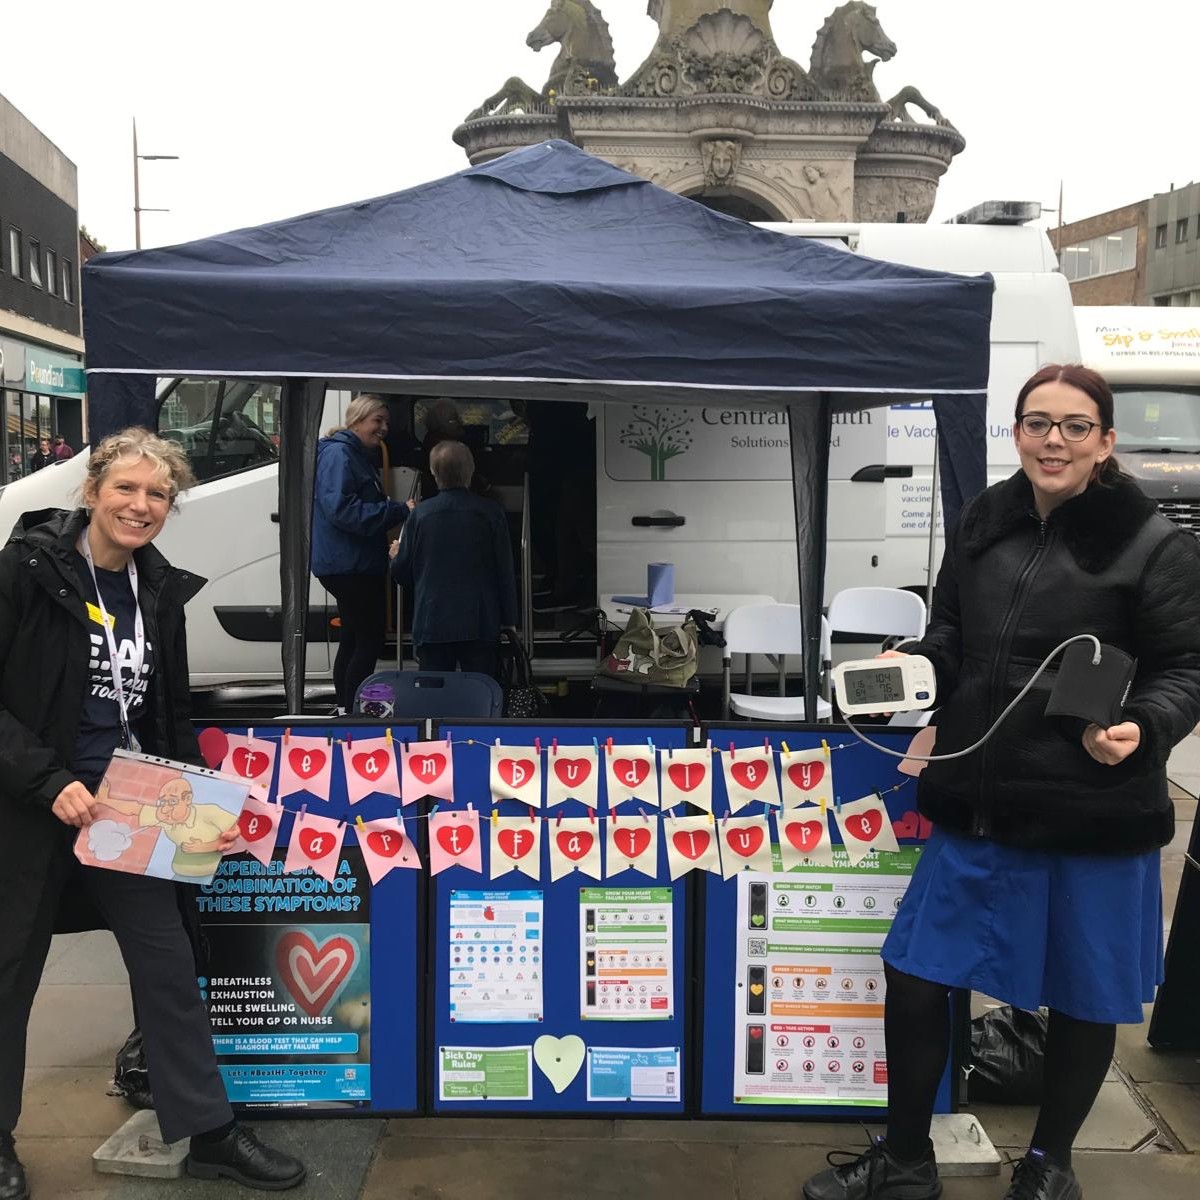 Jacqui Elson-Whittaker and Joanne Lees are promoting #HeartFailureAwarenessWeek today in Dudley & Sandwell. 

HIWM are supporting @HealthInnovNet national heart failure programme and @pumpinghearts #BEATHF campaign to support earlier diagnosis. Resources also available @TheBHF.